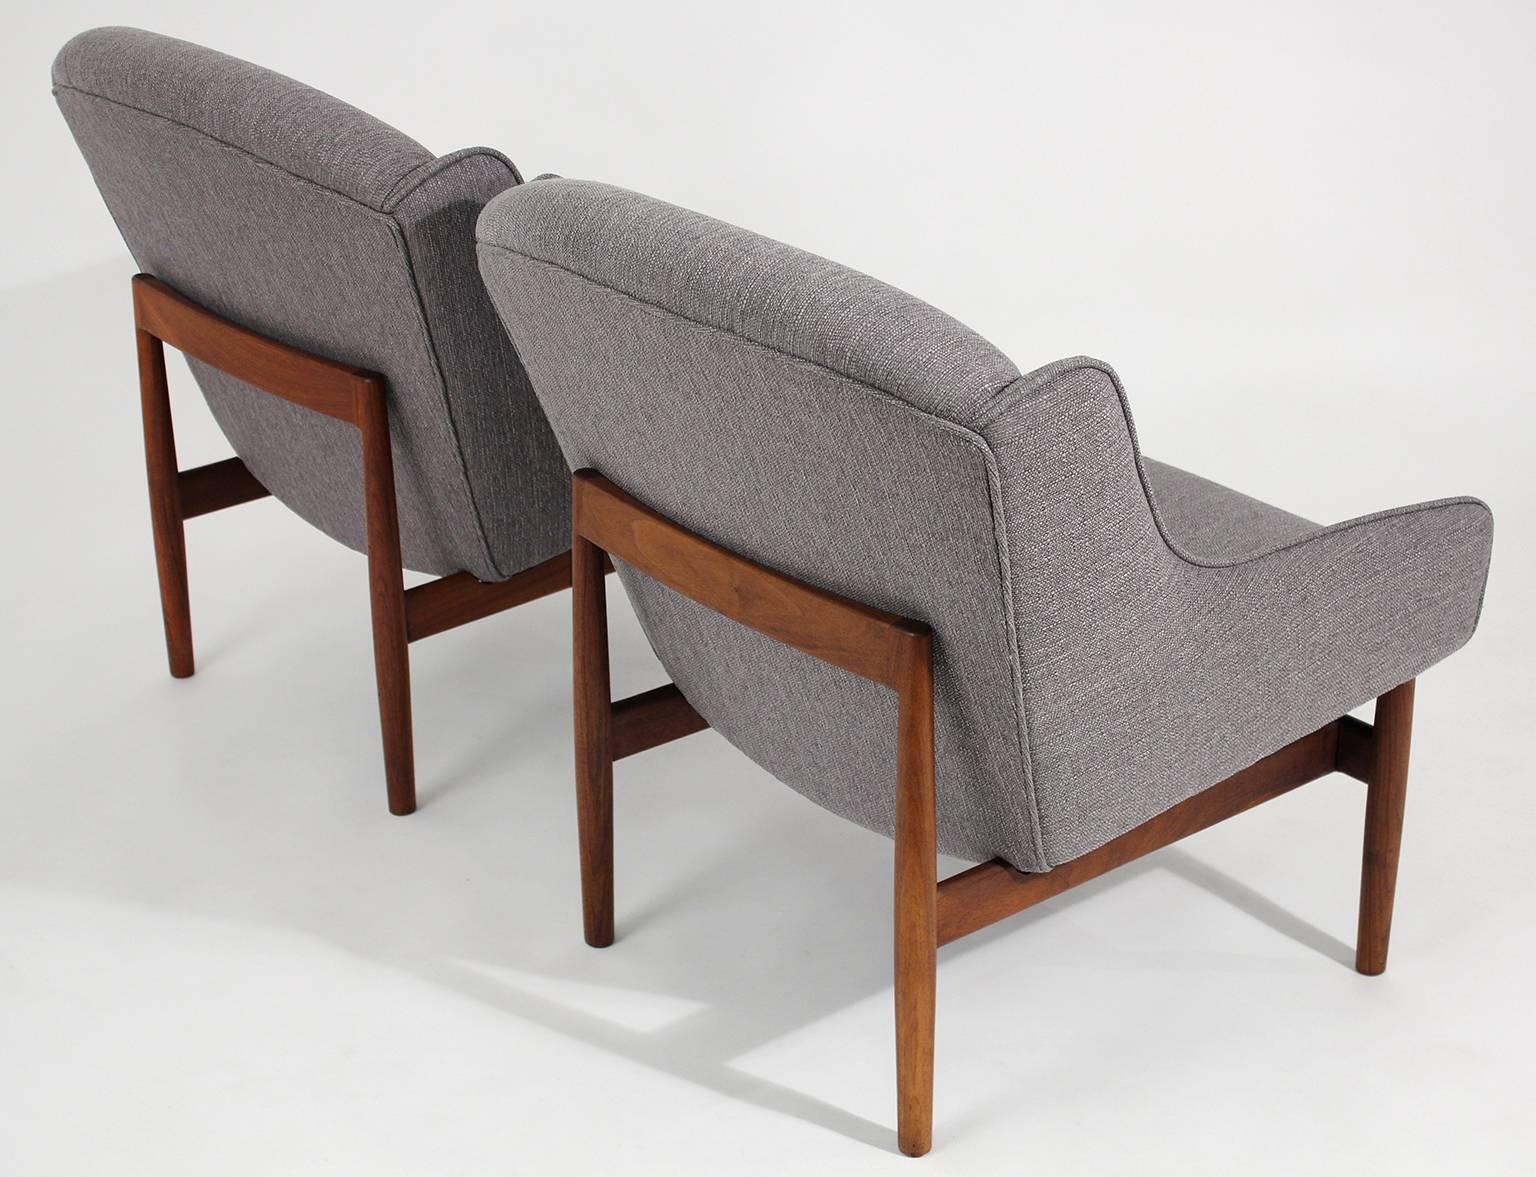 Mid-20th Century Jens Risom Pair of Lounge Chairs for Jens Risom Design, Inc.